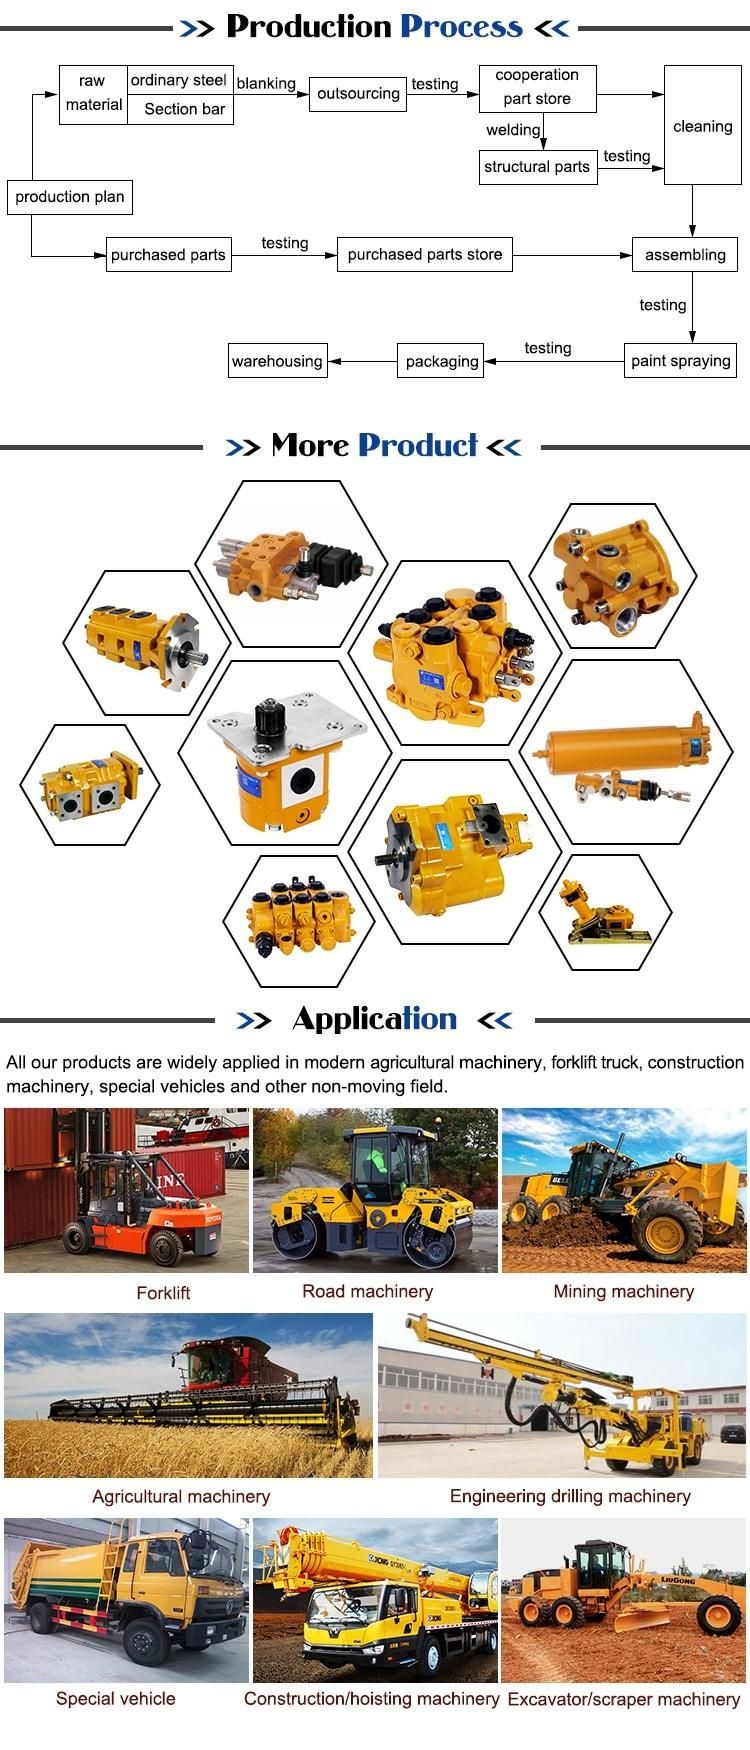 Light Weight Hydraulic Oil Cylinder for Sale